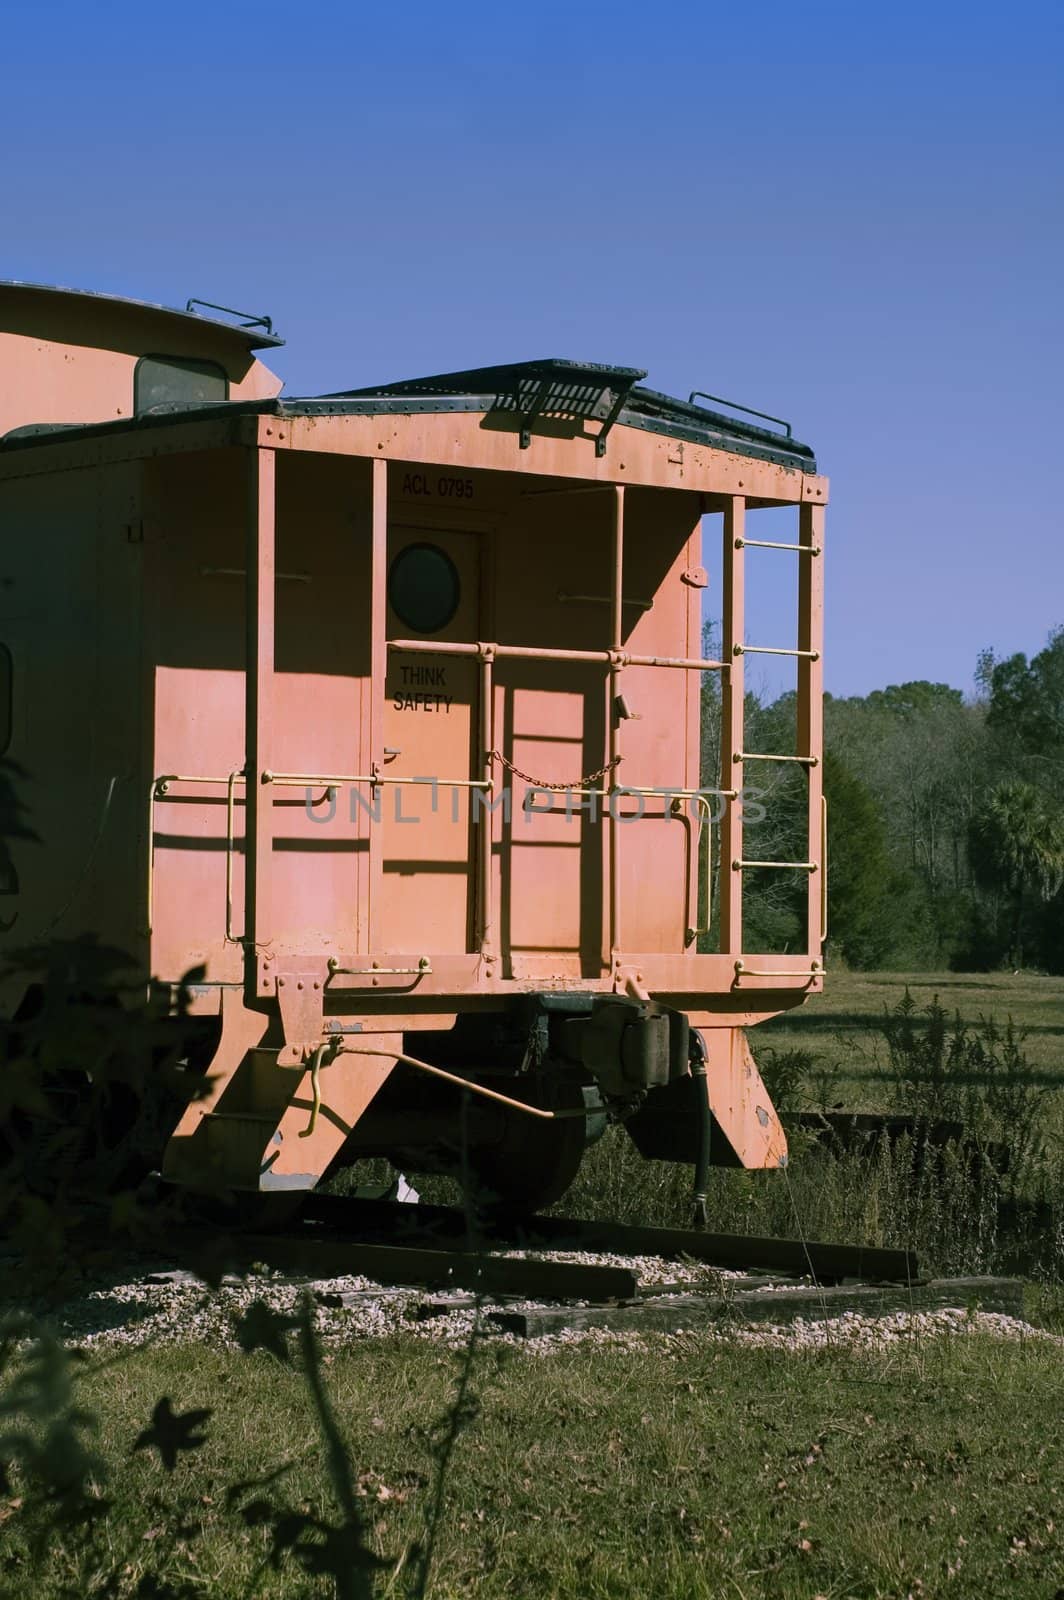 An old caboose sits on permanent tracks.